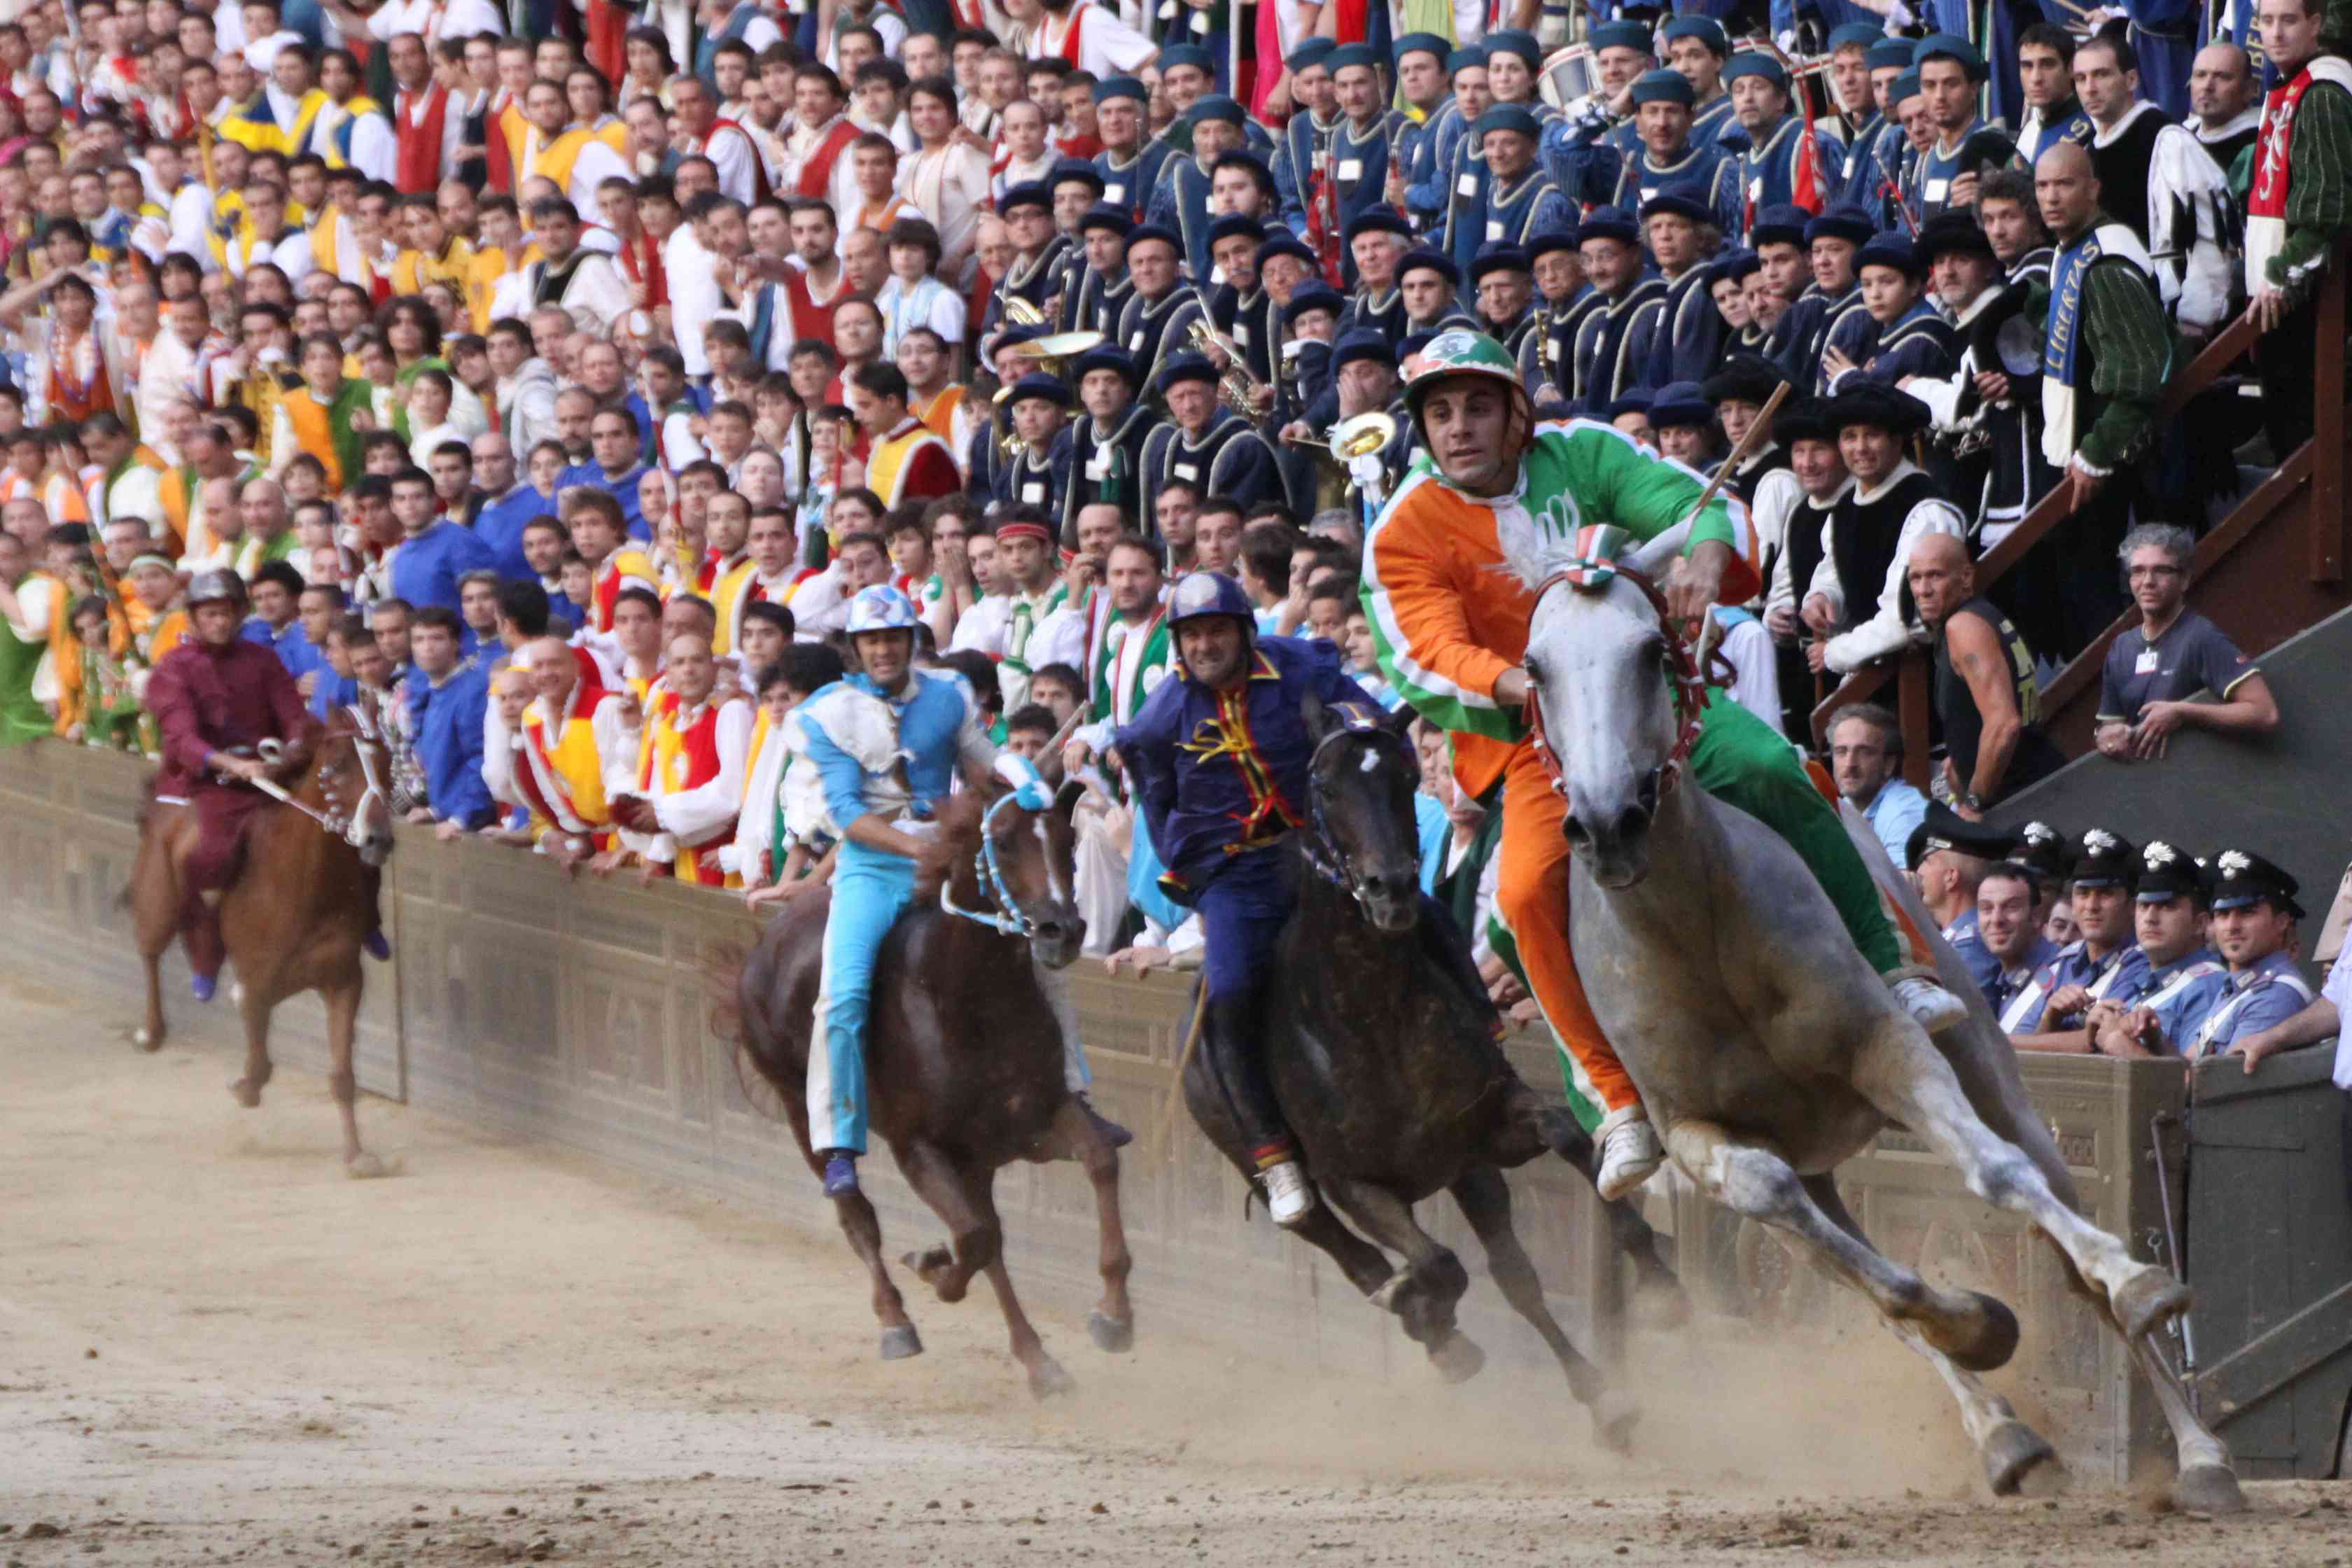 The furious, bareback, world-famous Palio di Siena around the main piazza at Siena in Italy, the race where young Maurizio Guarnieri made his first mark on equine sport